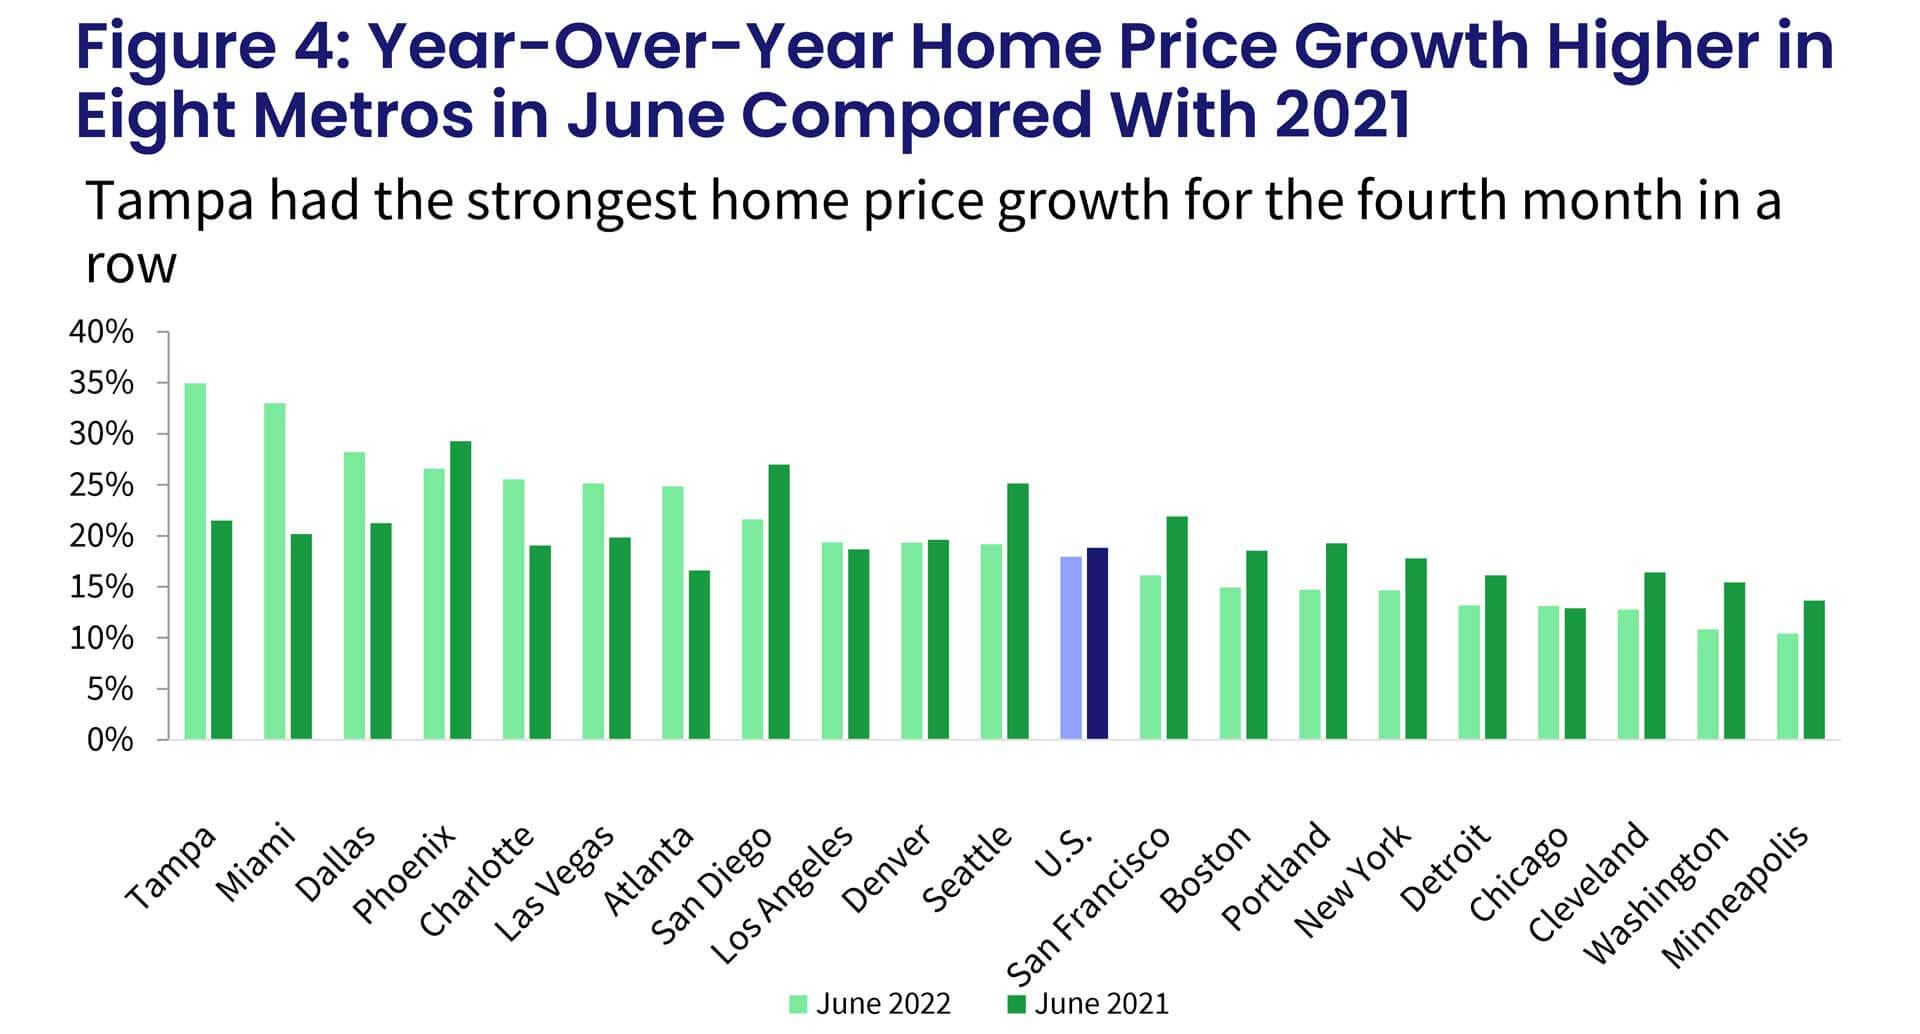 Figure 4: Year-Over-Year Home Price Growth Higher in Eight Metros in June Compared With 2021